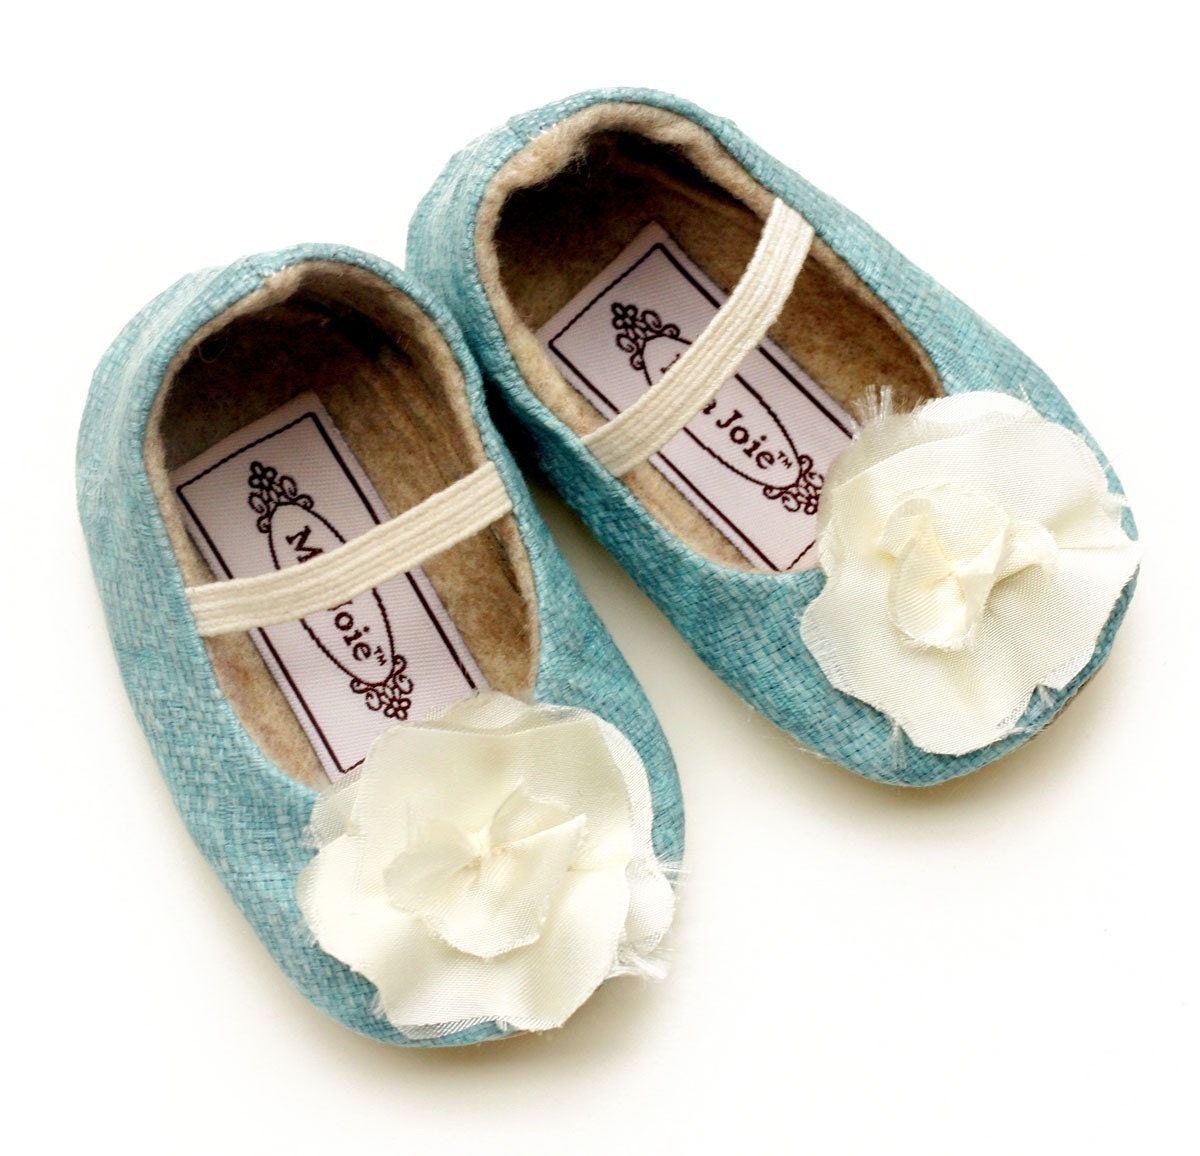 Bloom Baby / Toddler Shoes in Dusty Blue